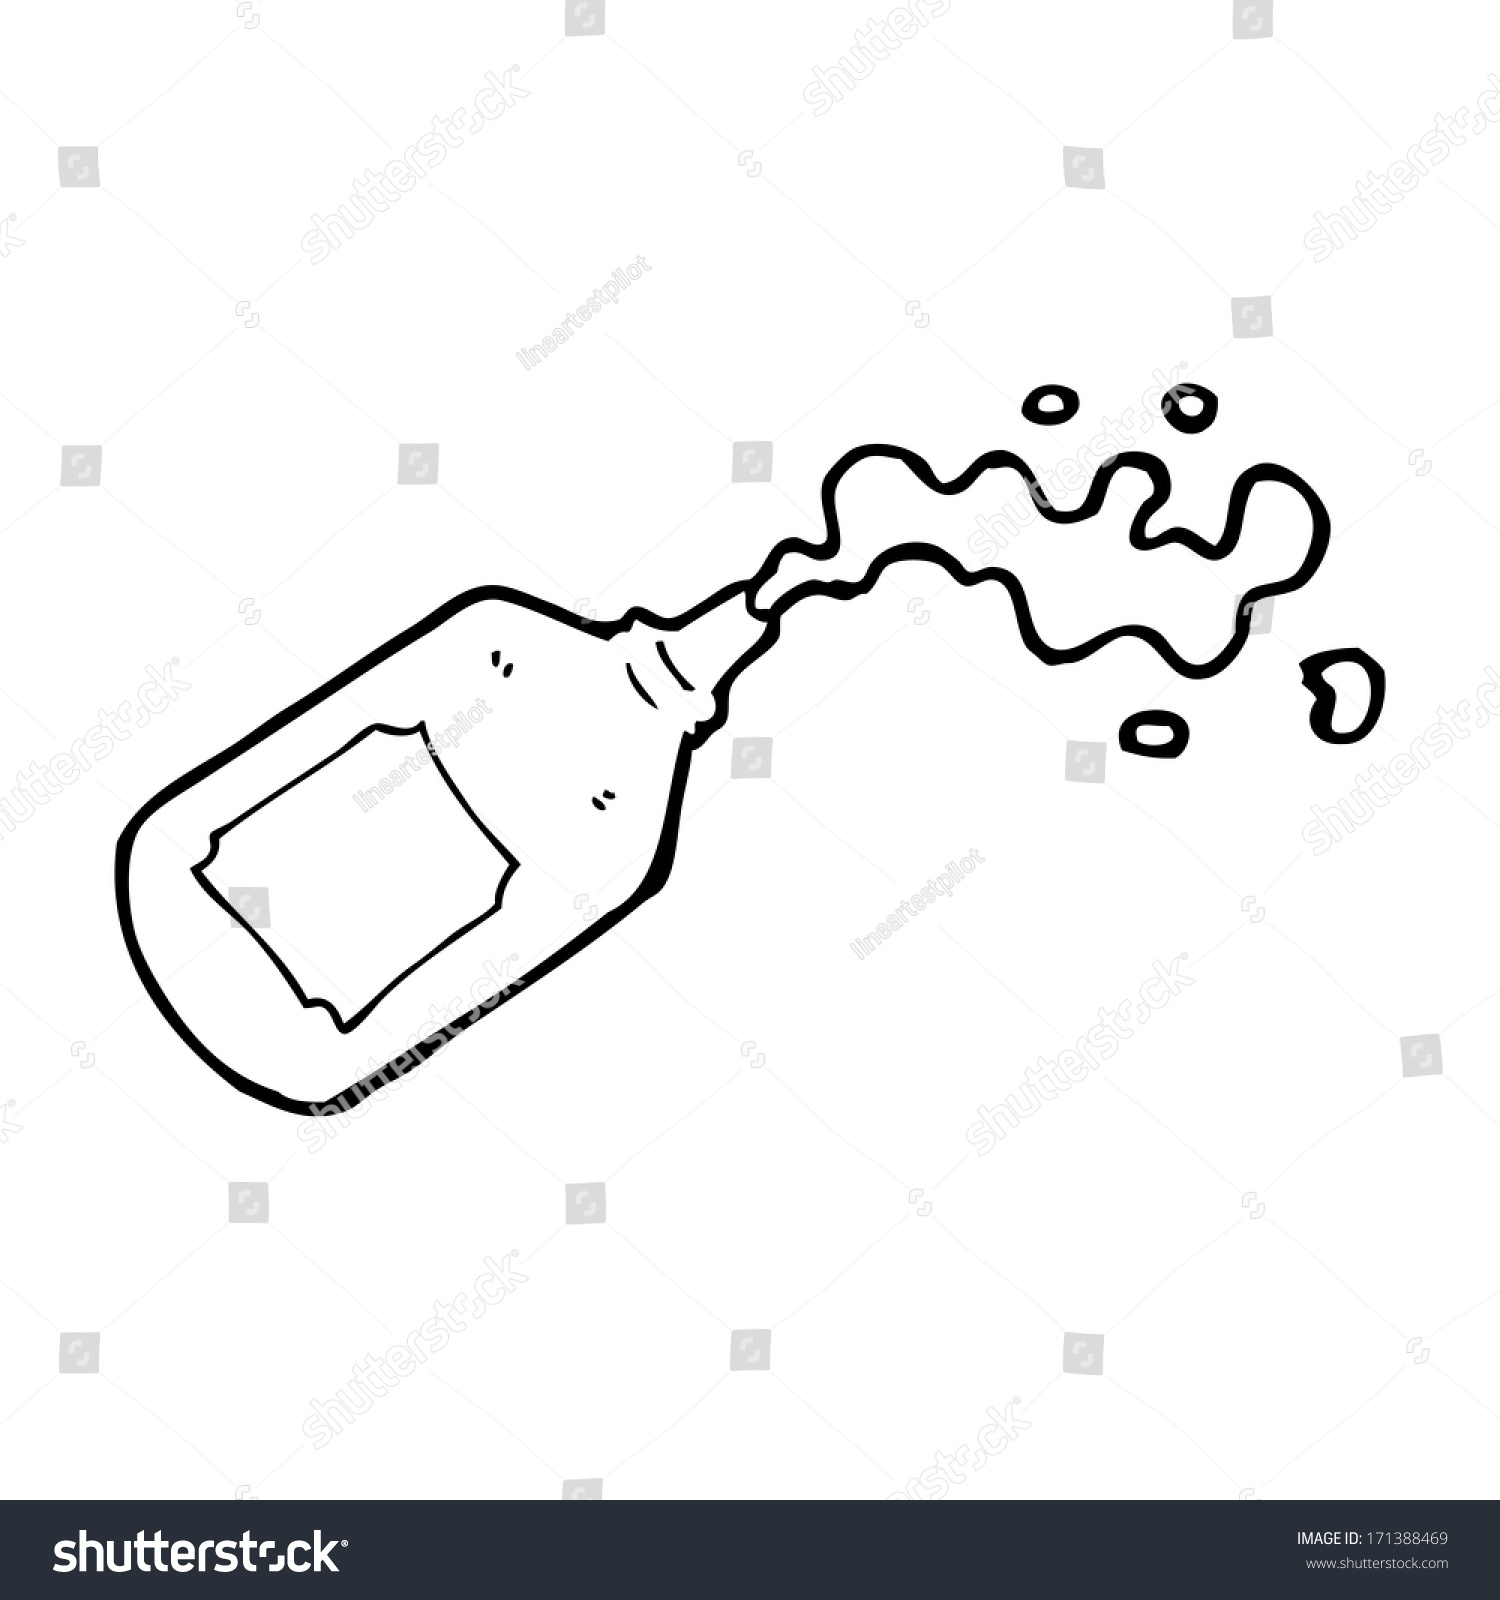 Cartoon Squirting Bottle Stock Vector Royalty Free 171388469